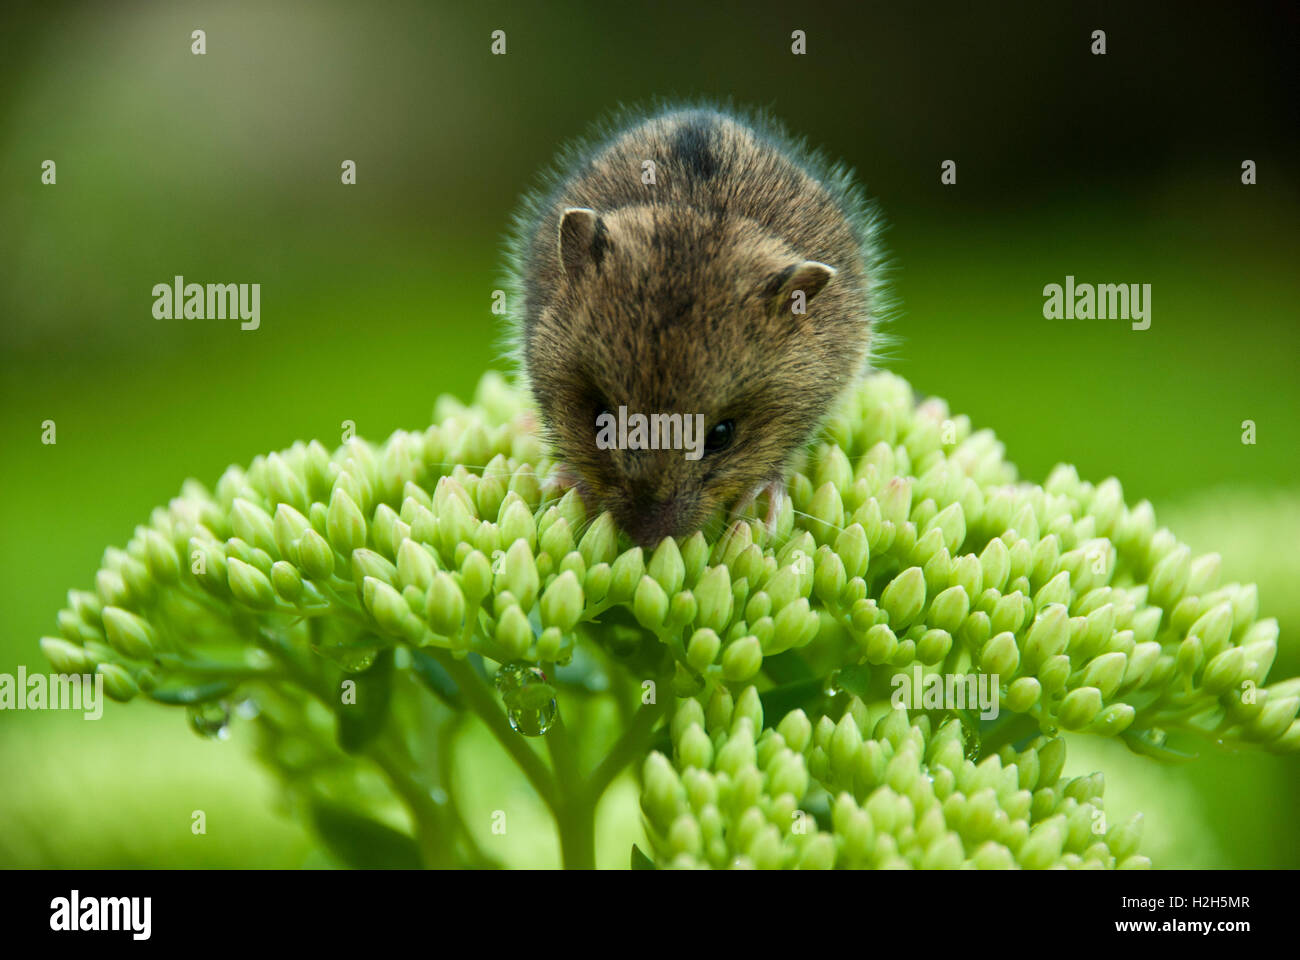 baby mouse sitting on a green flower Stock Photo